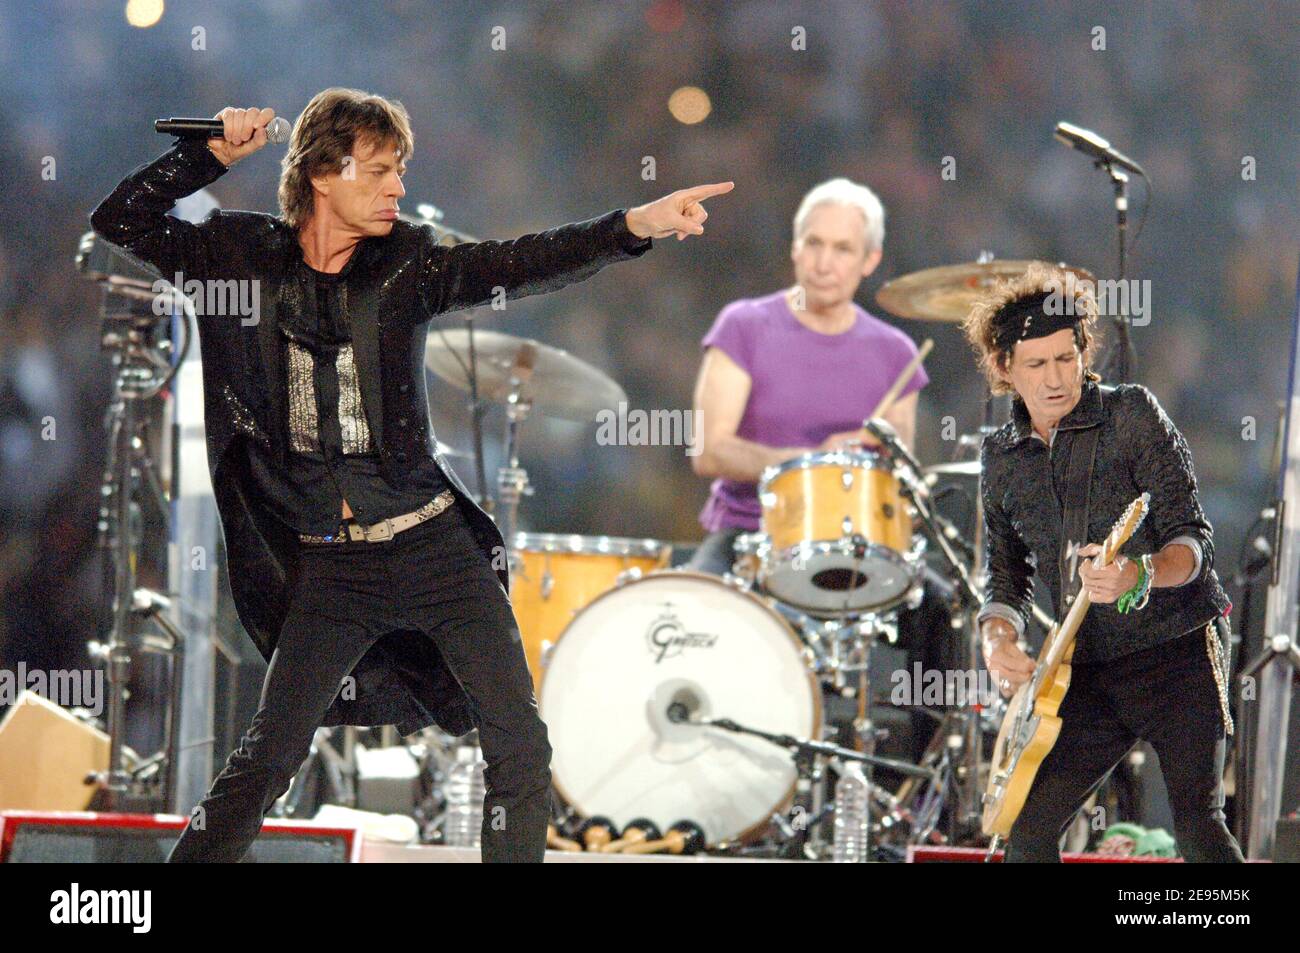 Mick Jagger, Charlie Watts and Keith Richards of The Rolling Stones perform  live on a special stage built on the field during the Super Bowl XL  Half-Time Show in Detroit, MI, USA